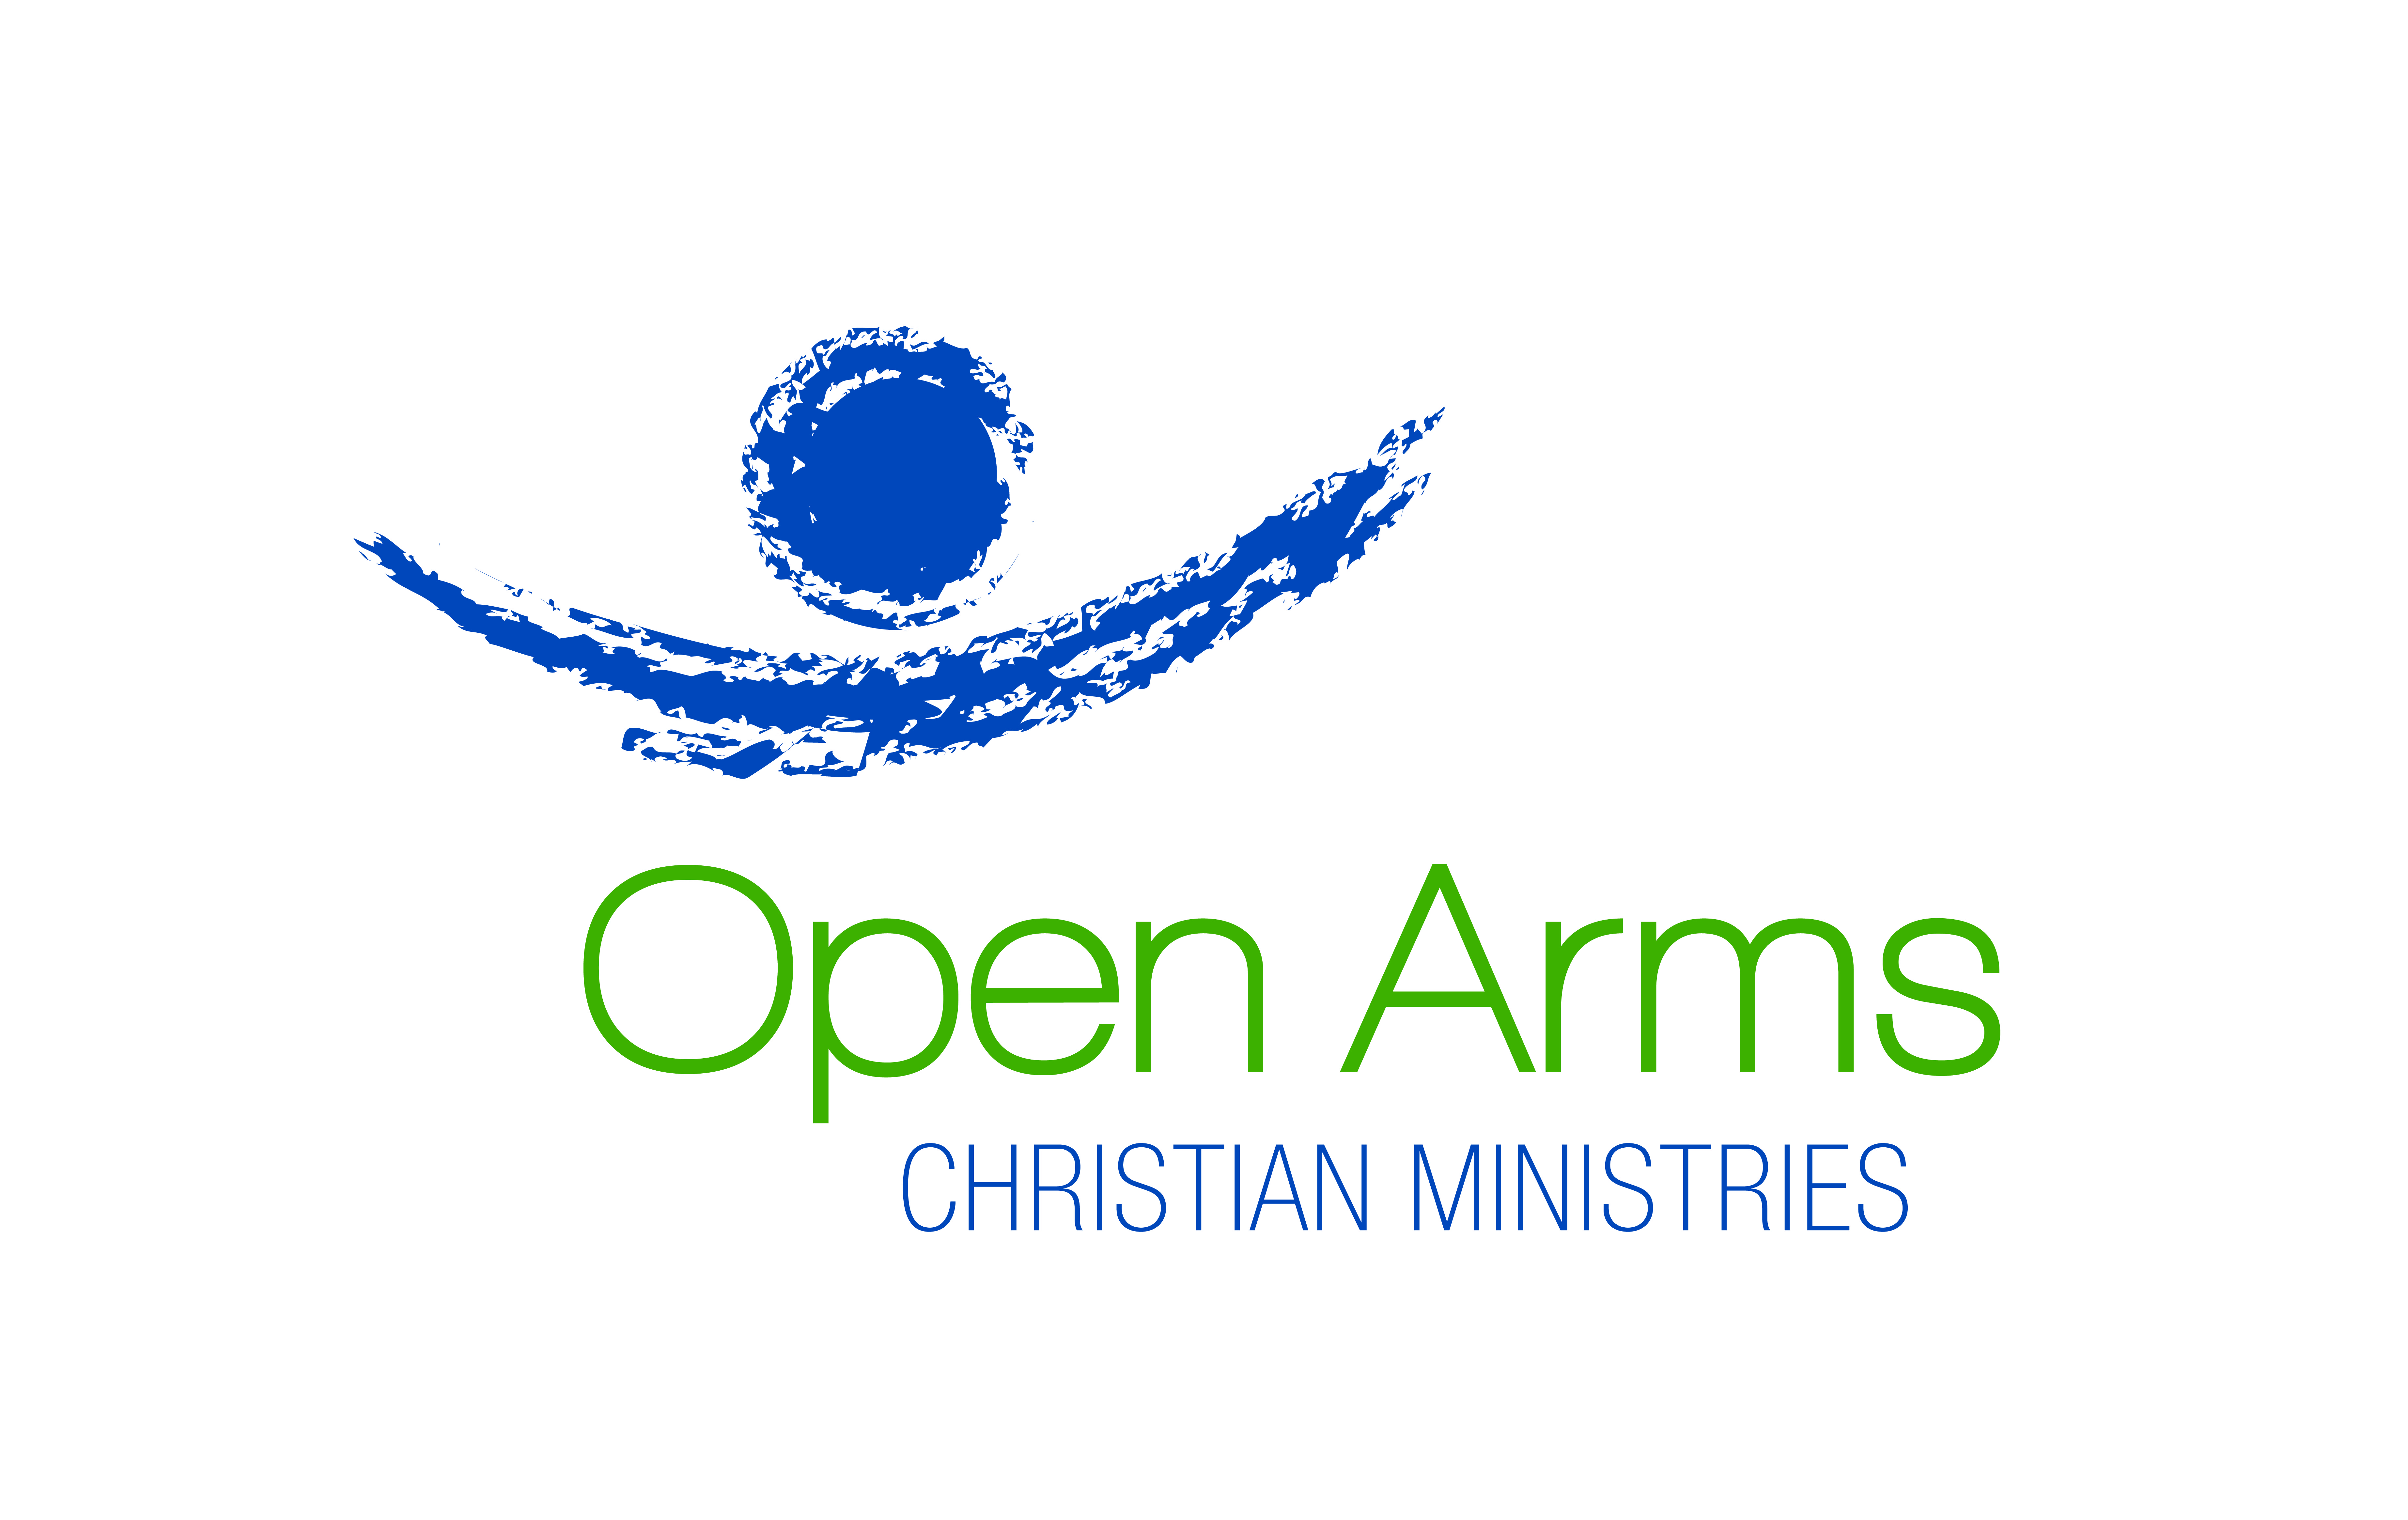 Open Arms Christian Ministries